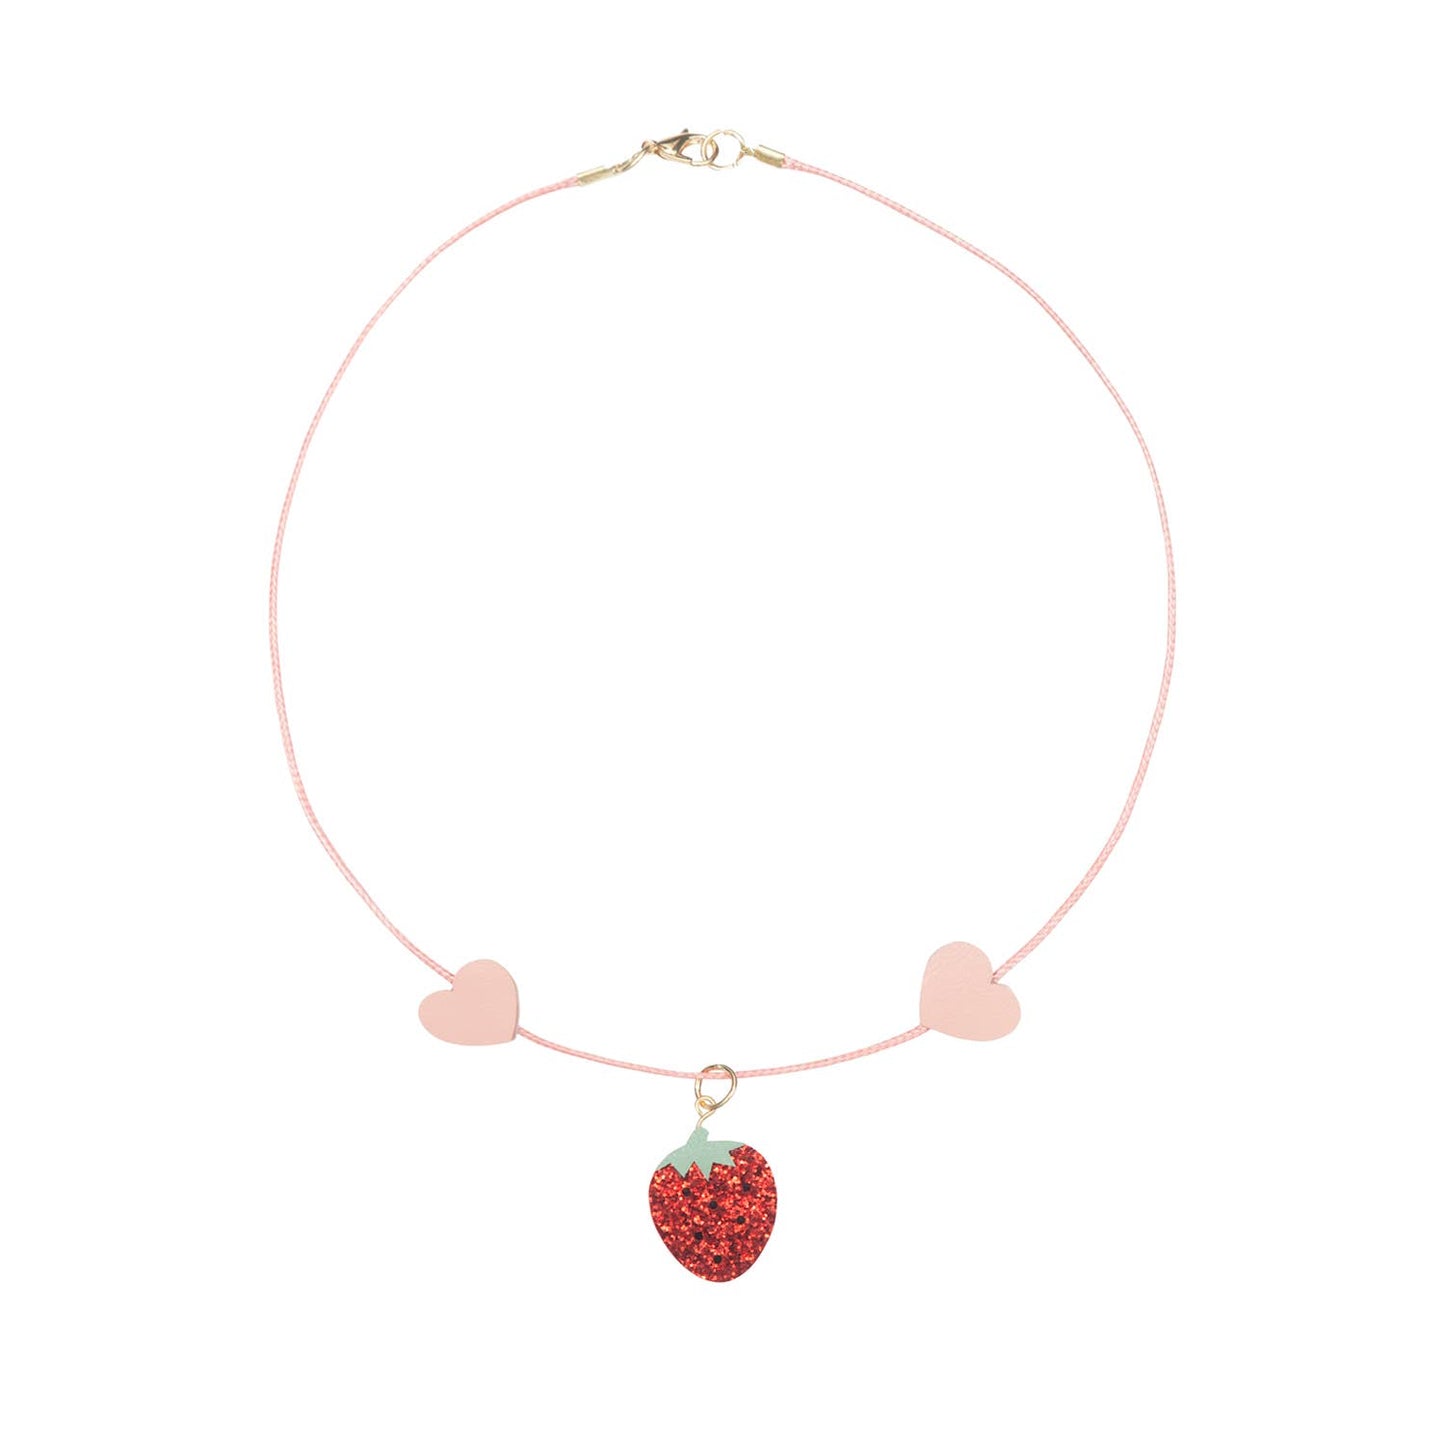 Strawberry Fairy Necklace